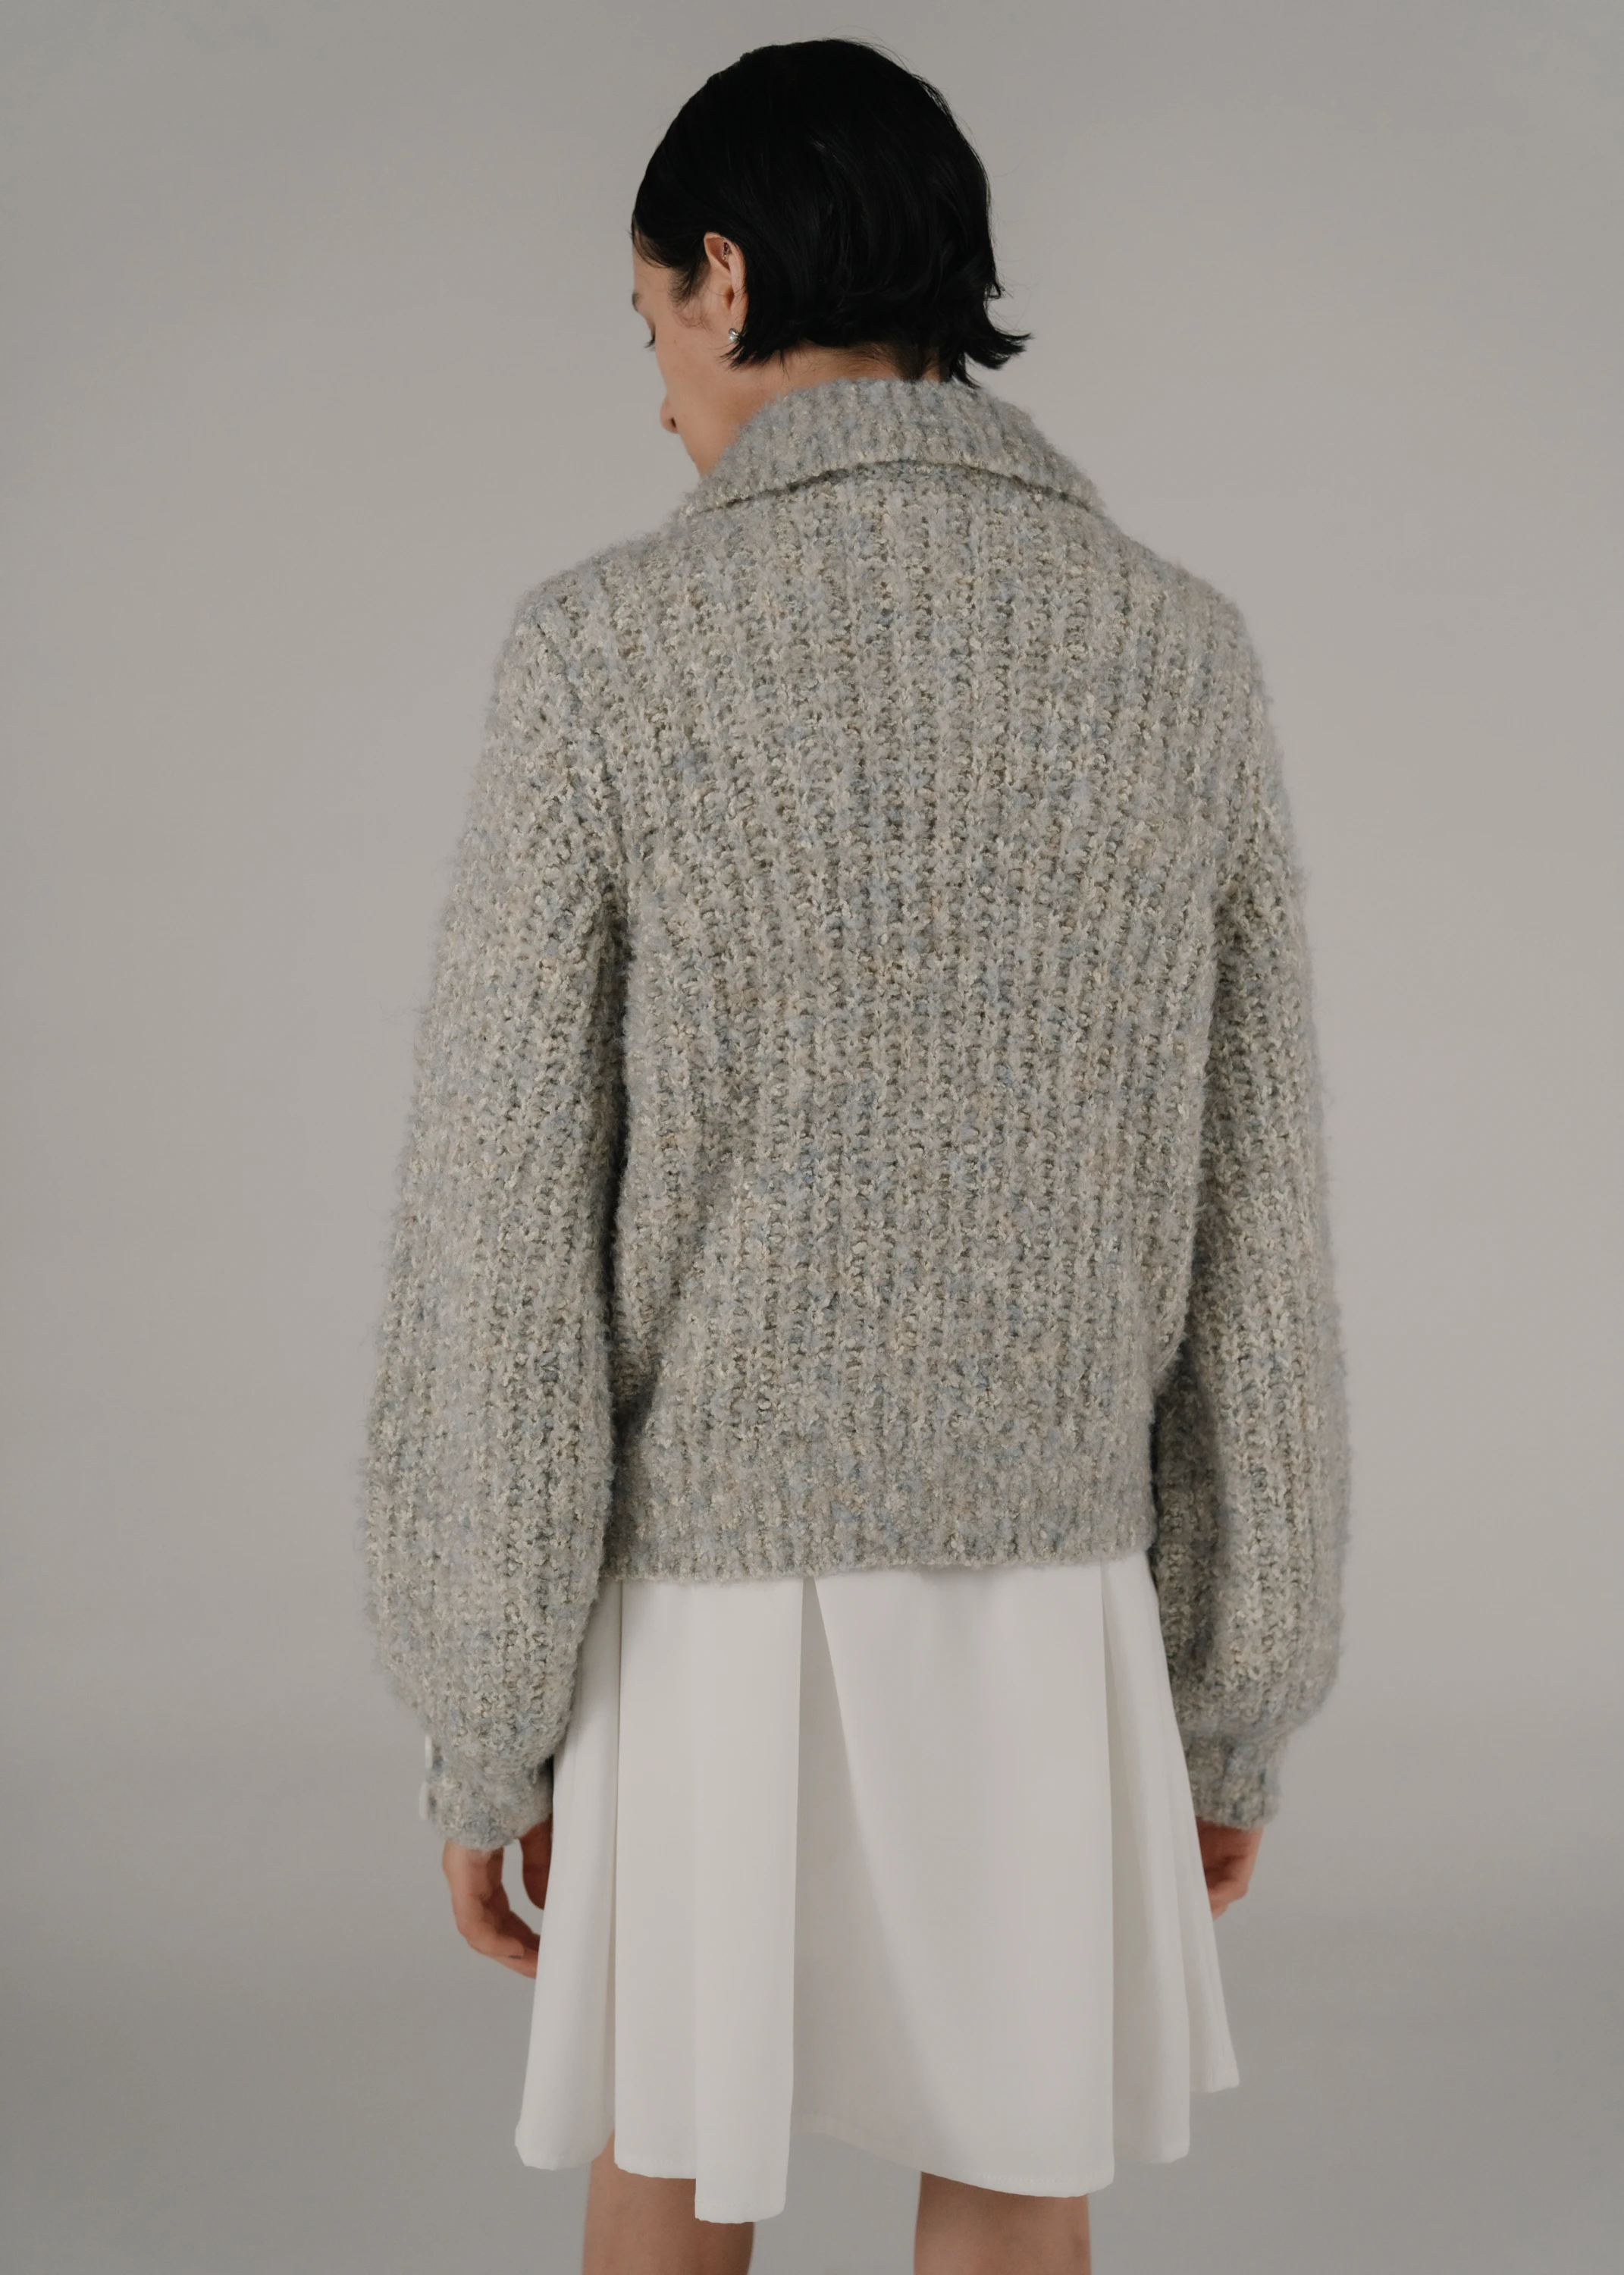 layered collar double yarn floatingly knit / willfully（ウィル